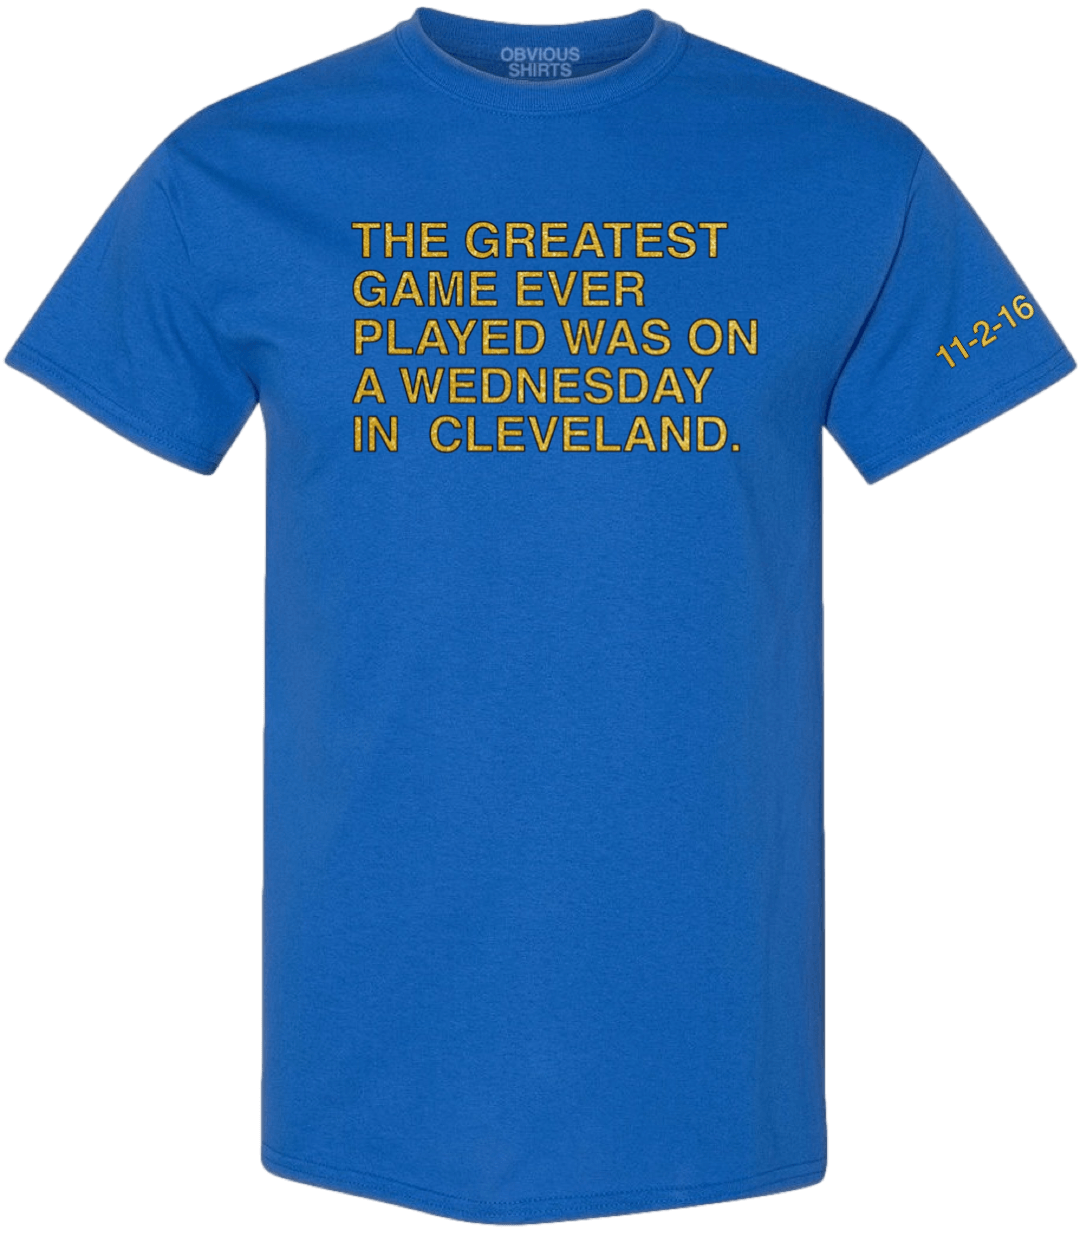 THE GREATEST GAME EVER PLAYED - ANNIVERSARY EDITION (BIG & TALL) - OBVIOUS SHIRTS